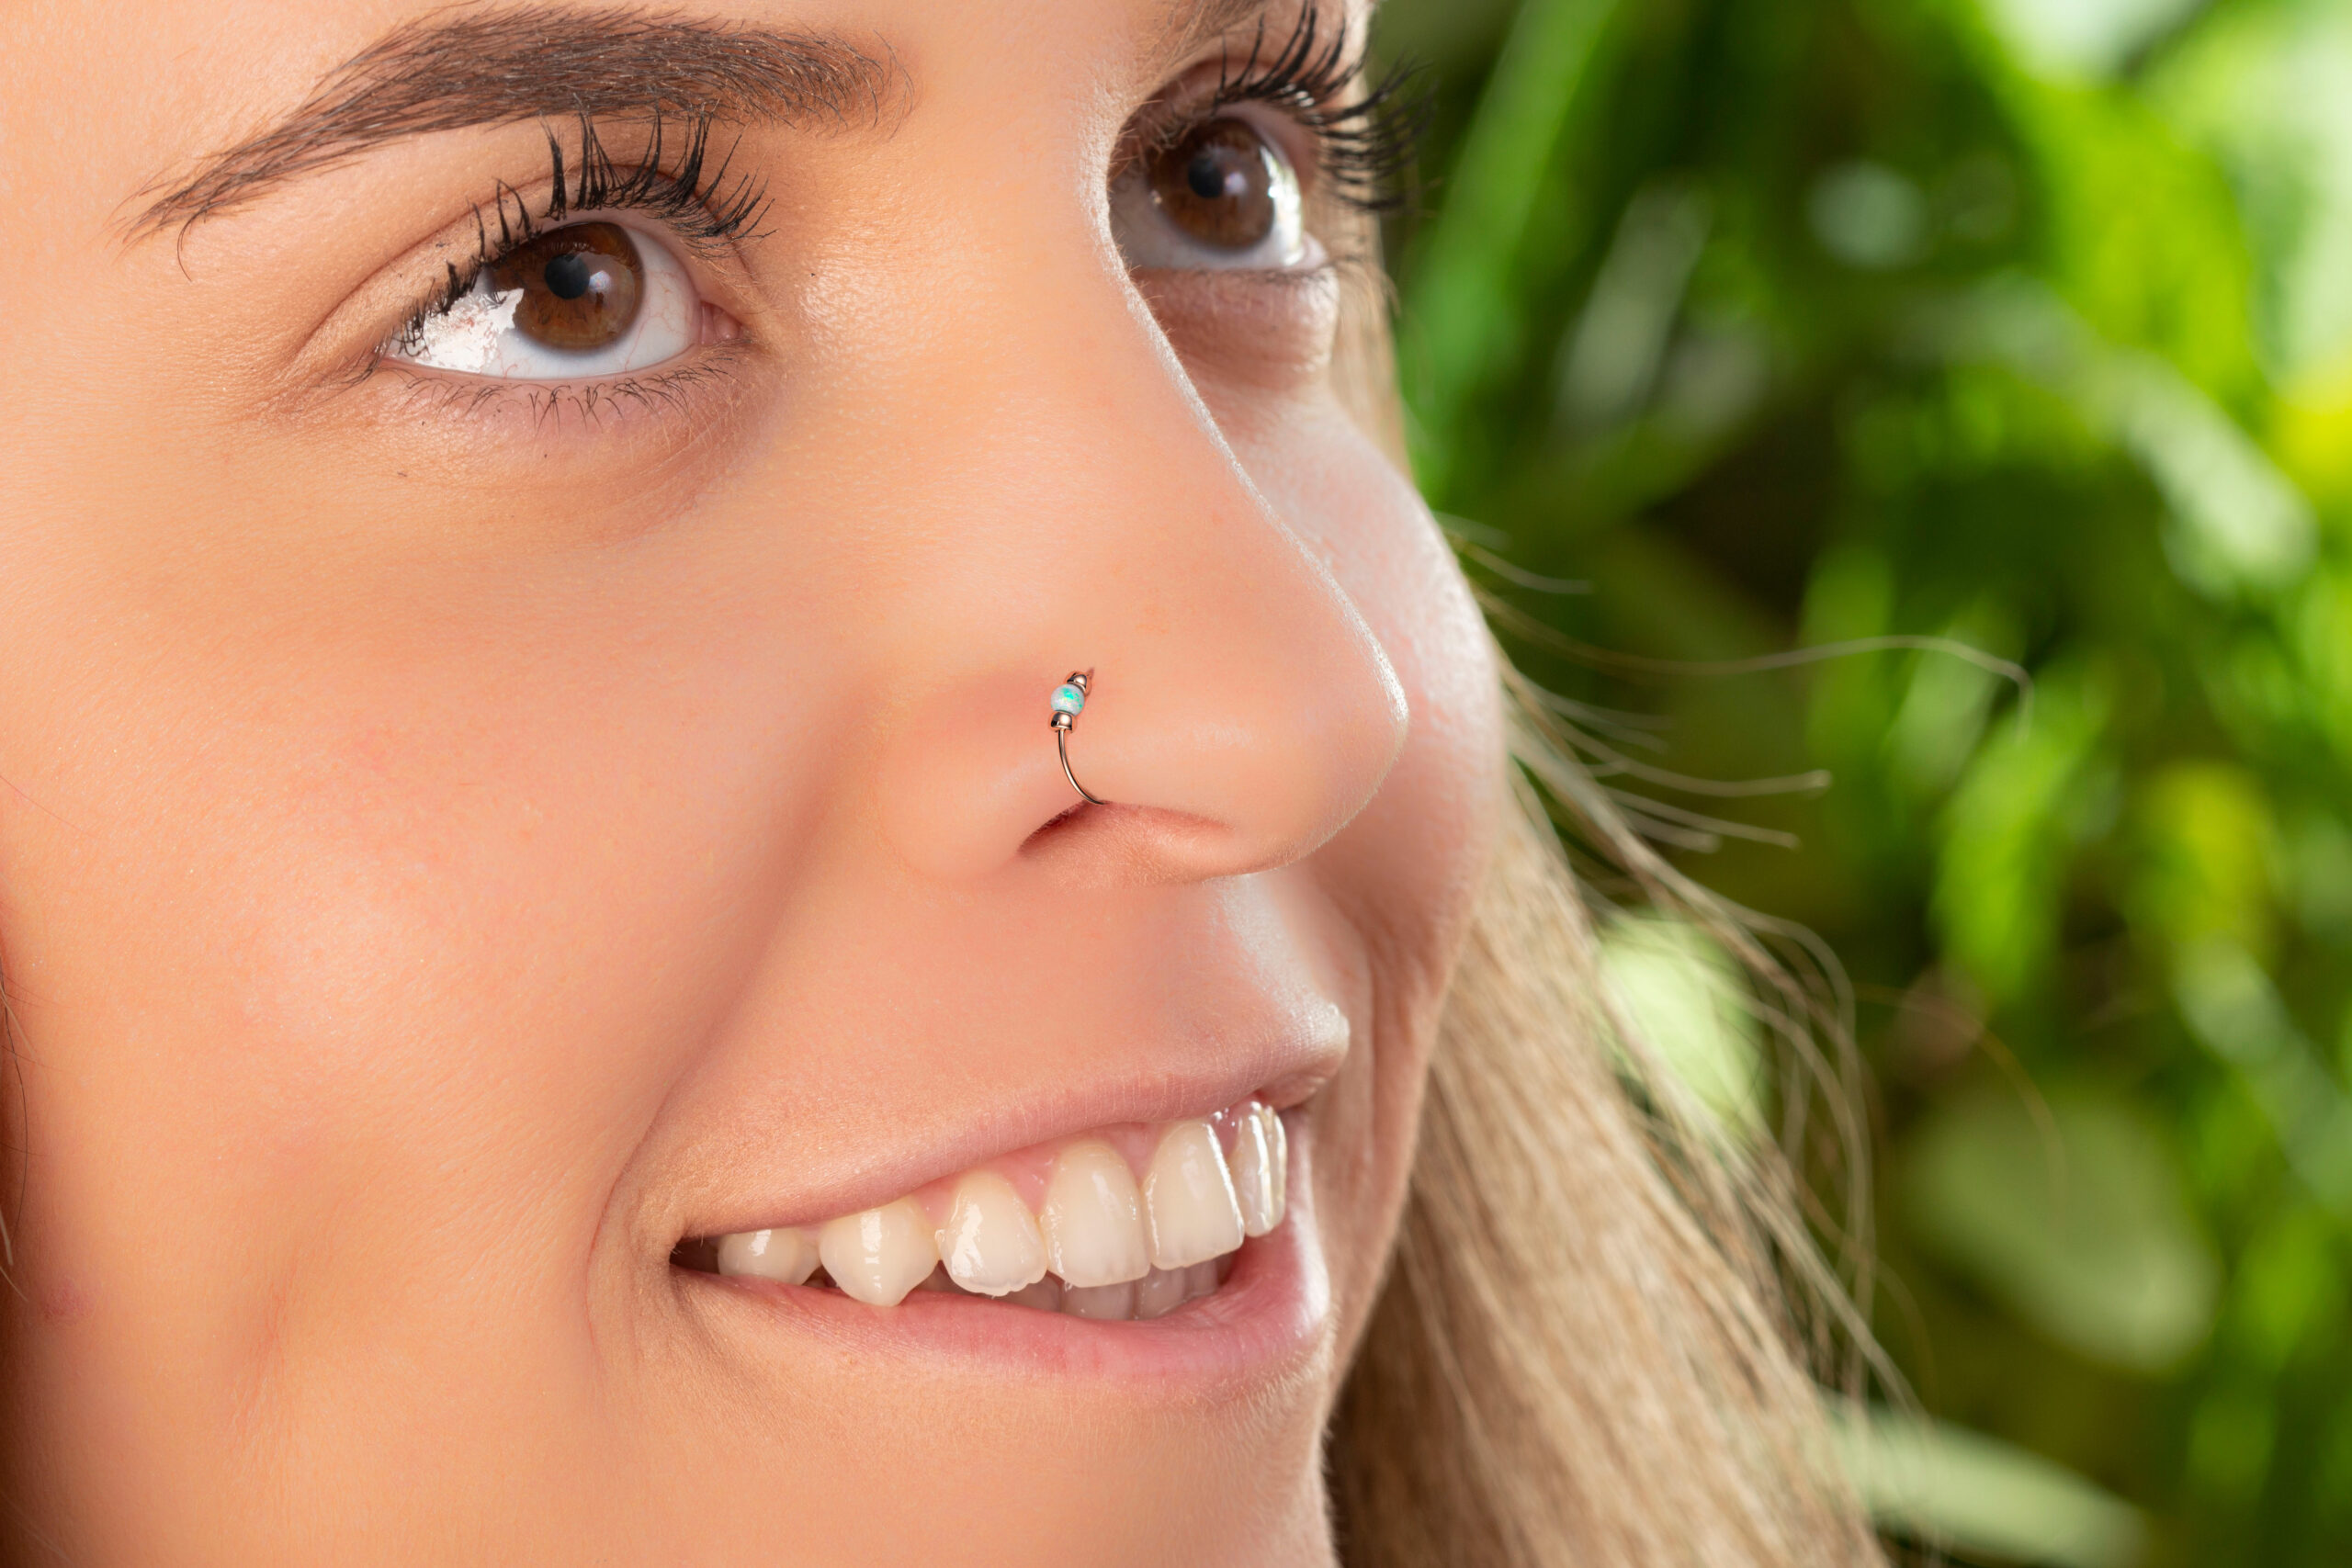 Amazon.com: Simple Nose Hoop Ring Jewelry - 24 Gauge Nose Ring  Hypoallergenic Gold Filled Nose Piercing - 7mm Diameter 0.2 Inches Nose  Jewelry - Unisex Nose Jewelry for Women Men : Handmade Products